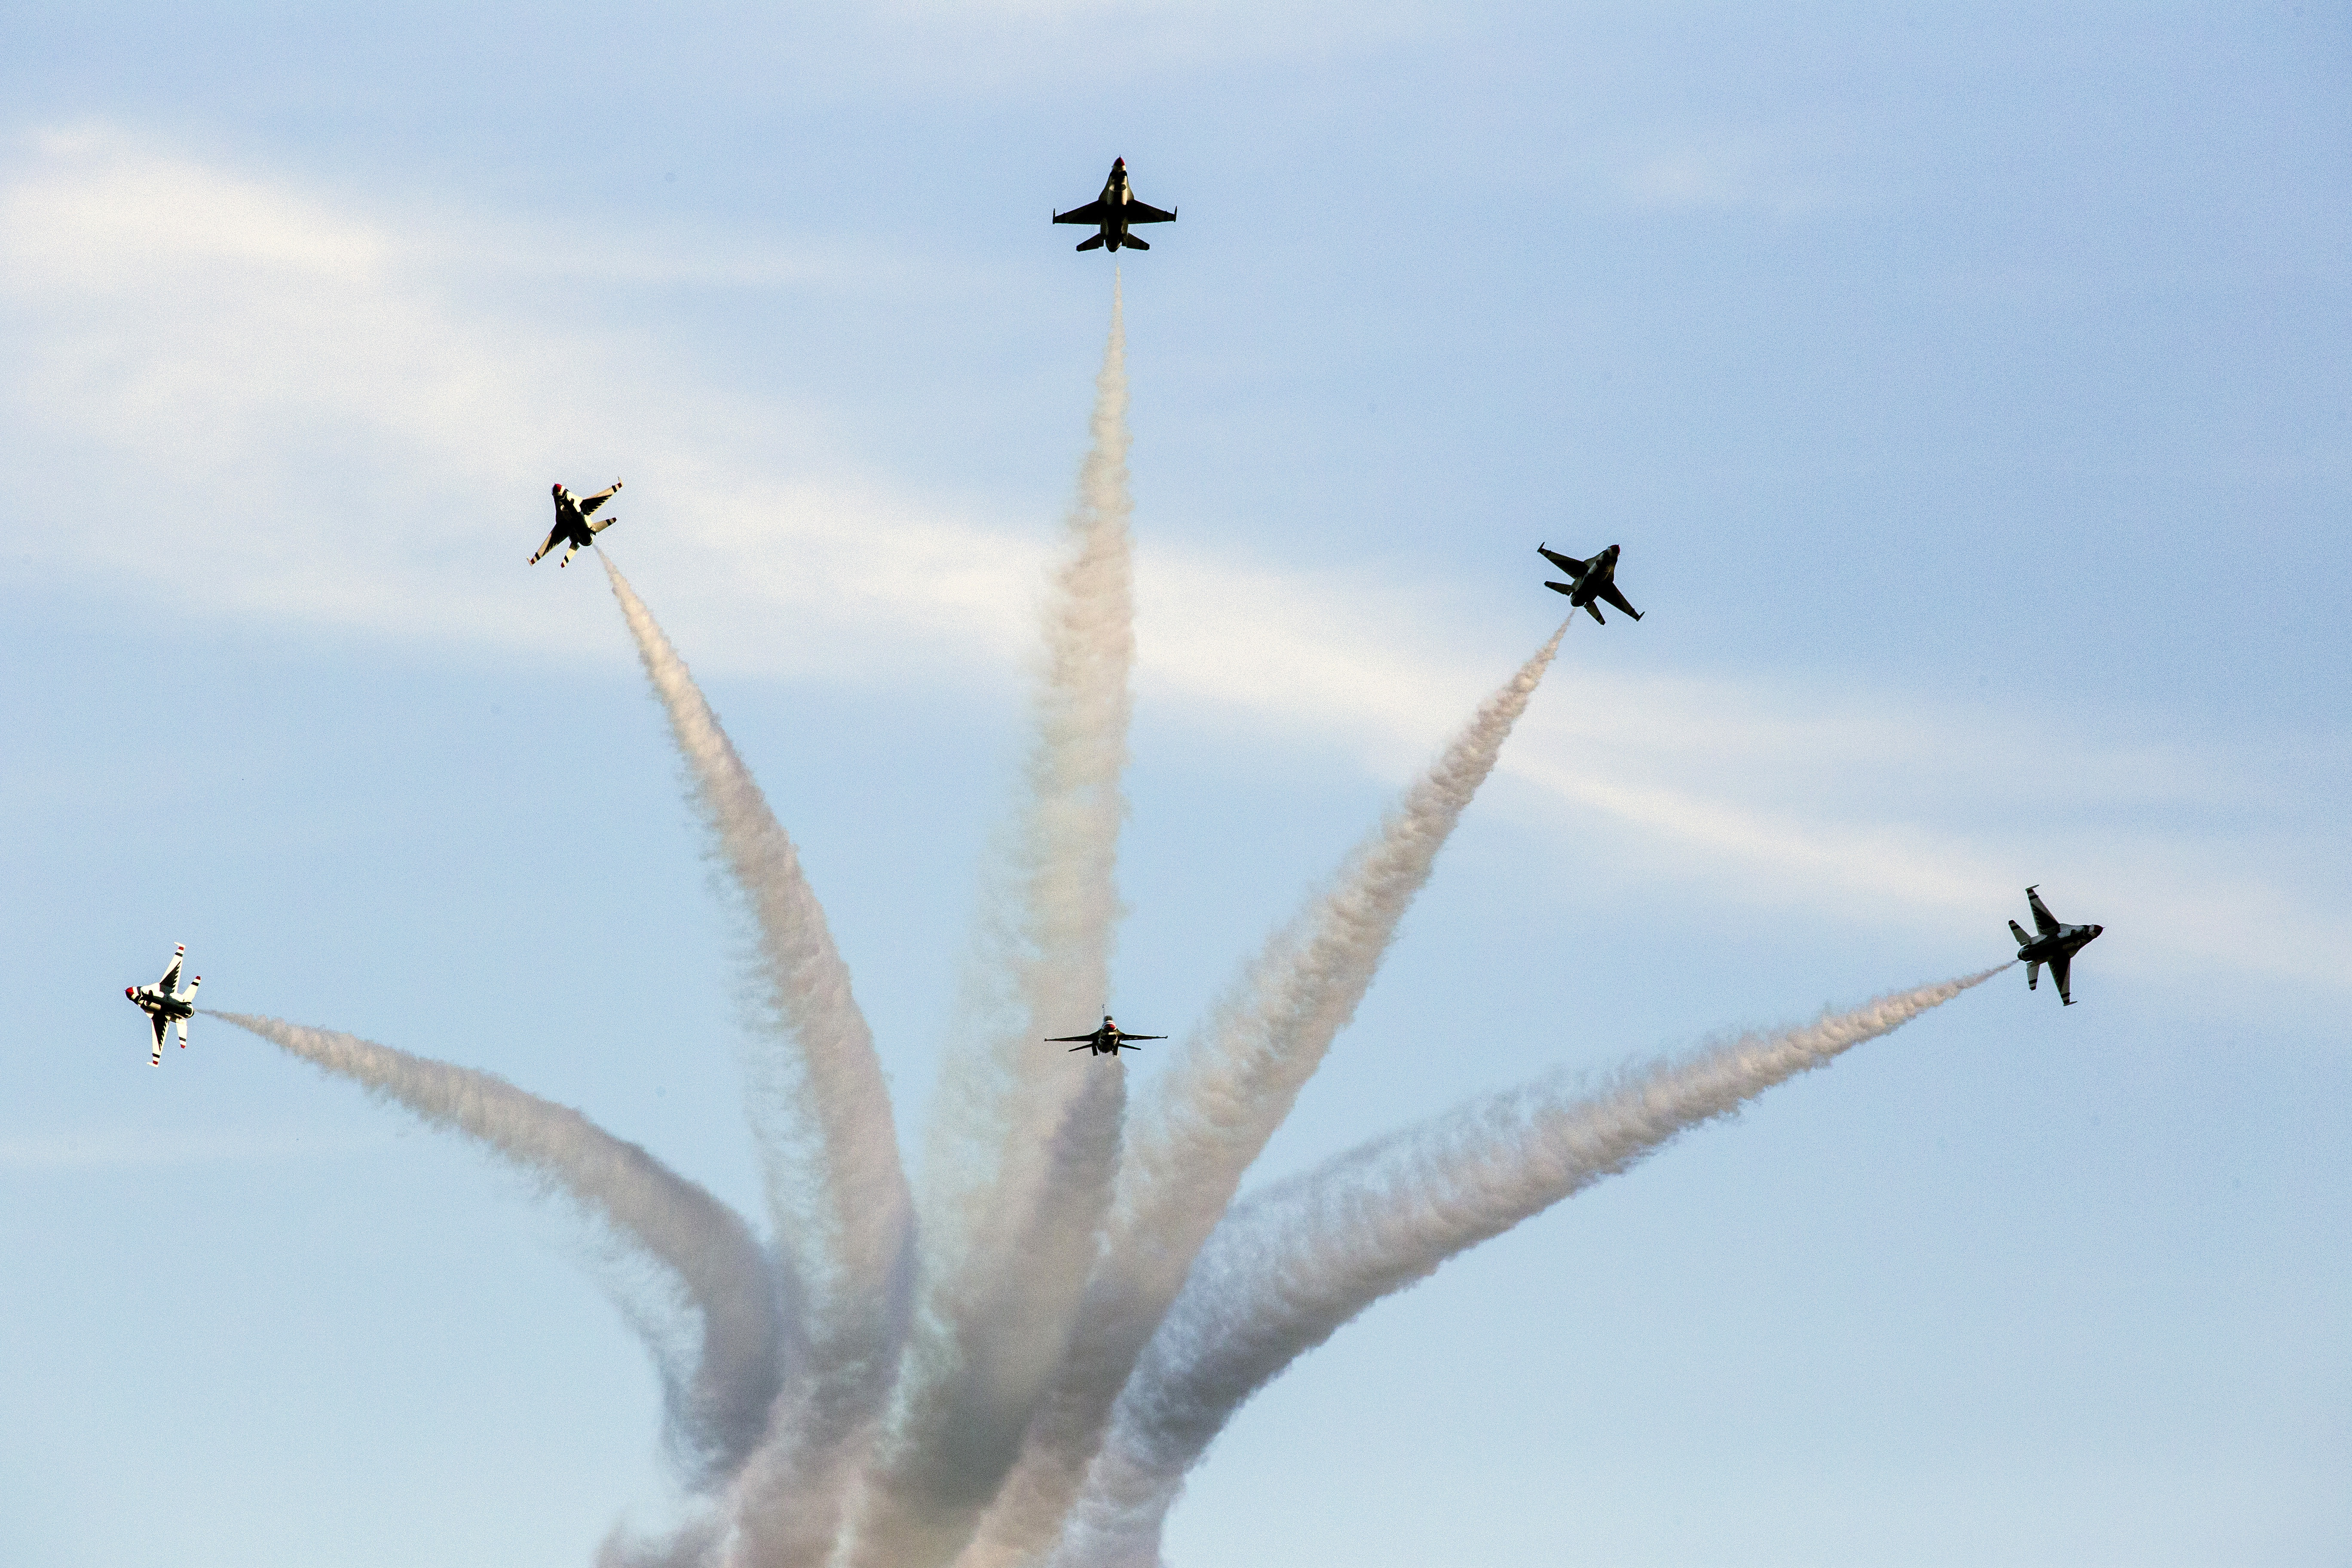 US Air Force Thunderbirds set to perform Super Bowl LIII flyover > Air